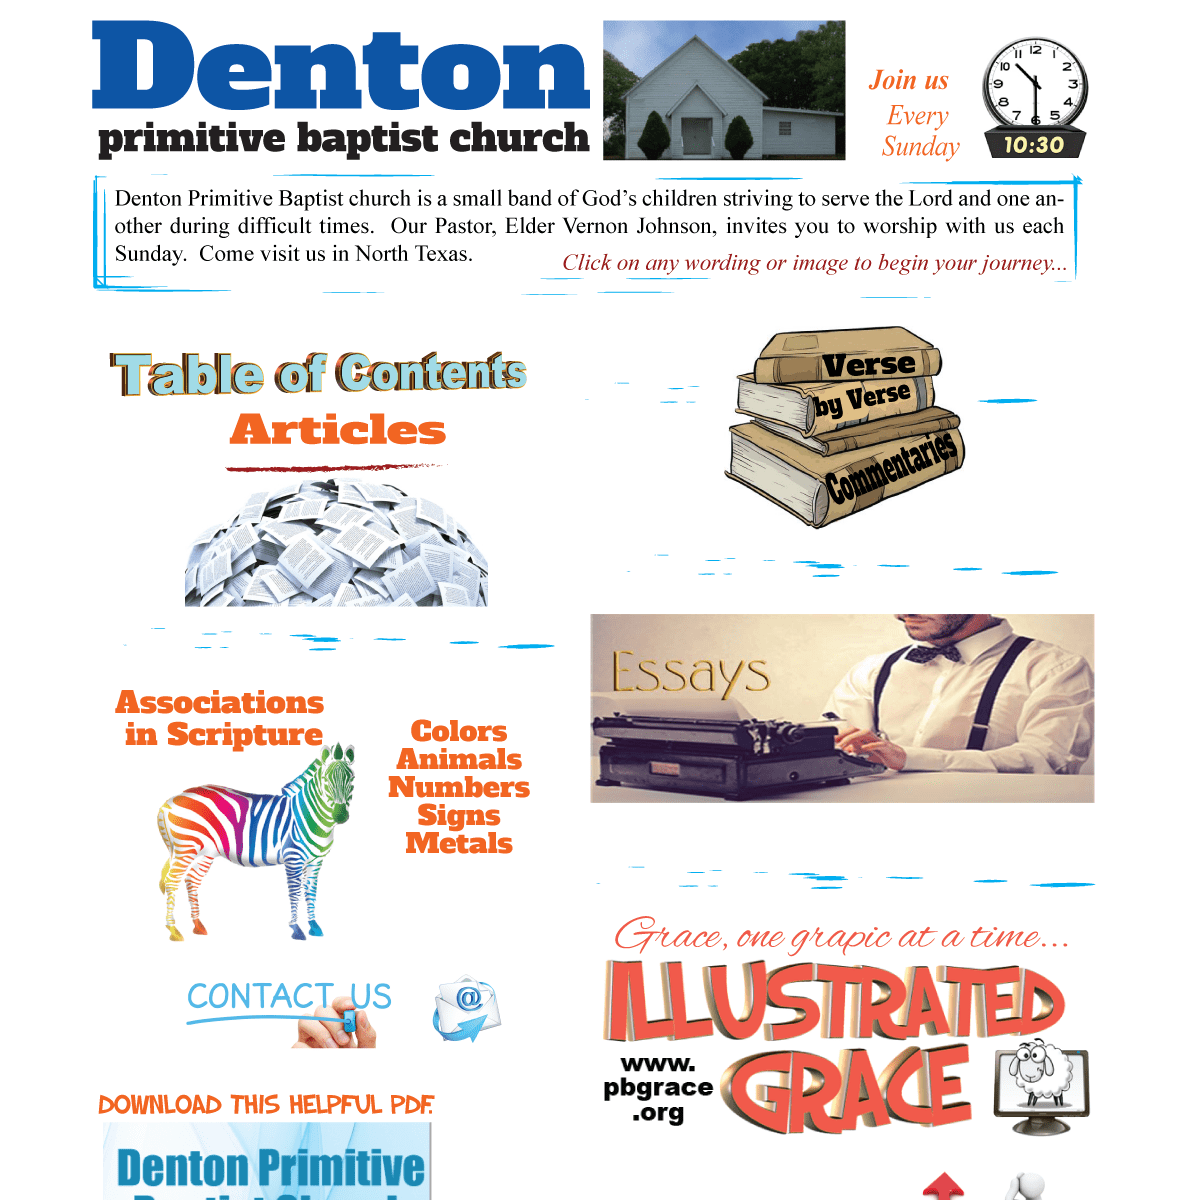 A complete backup of dentonpbc.org